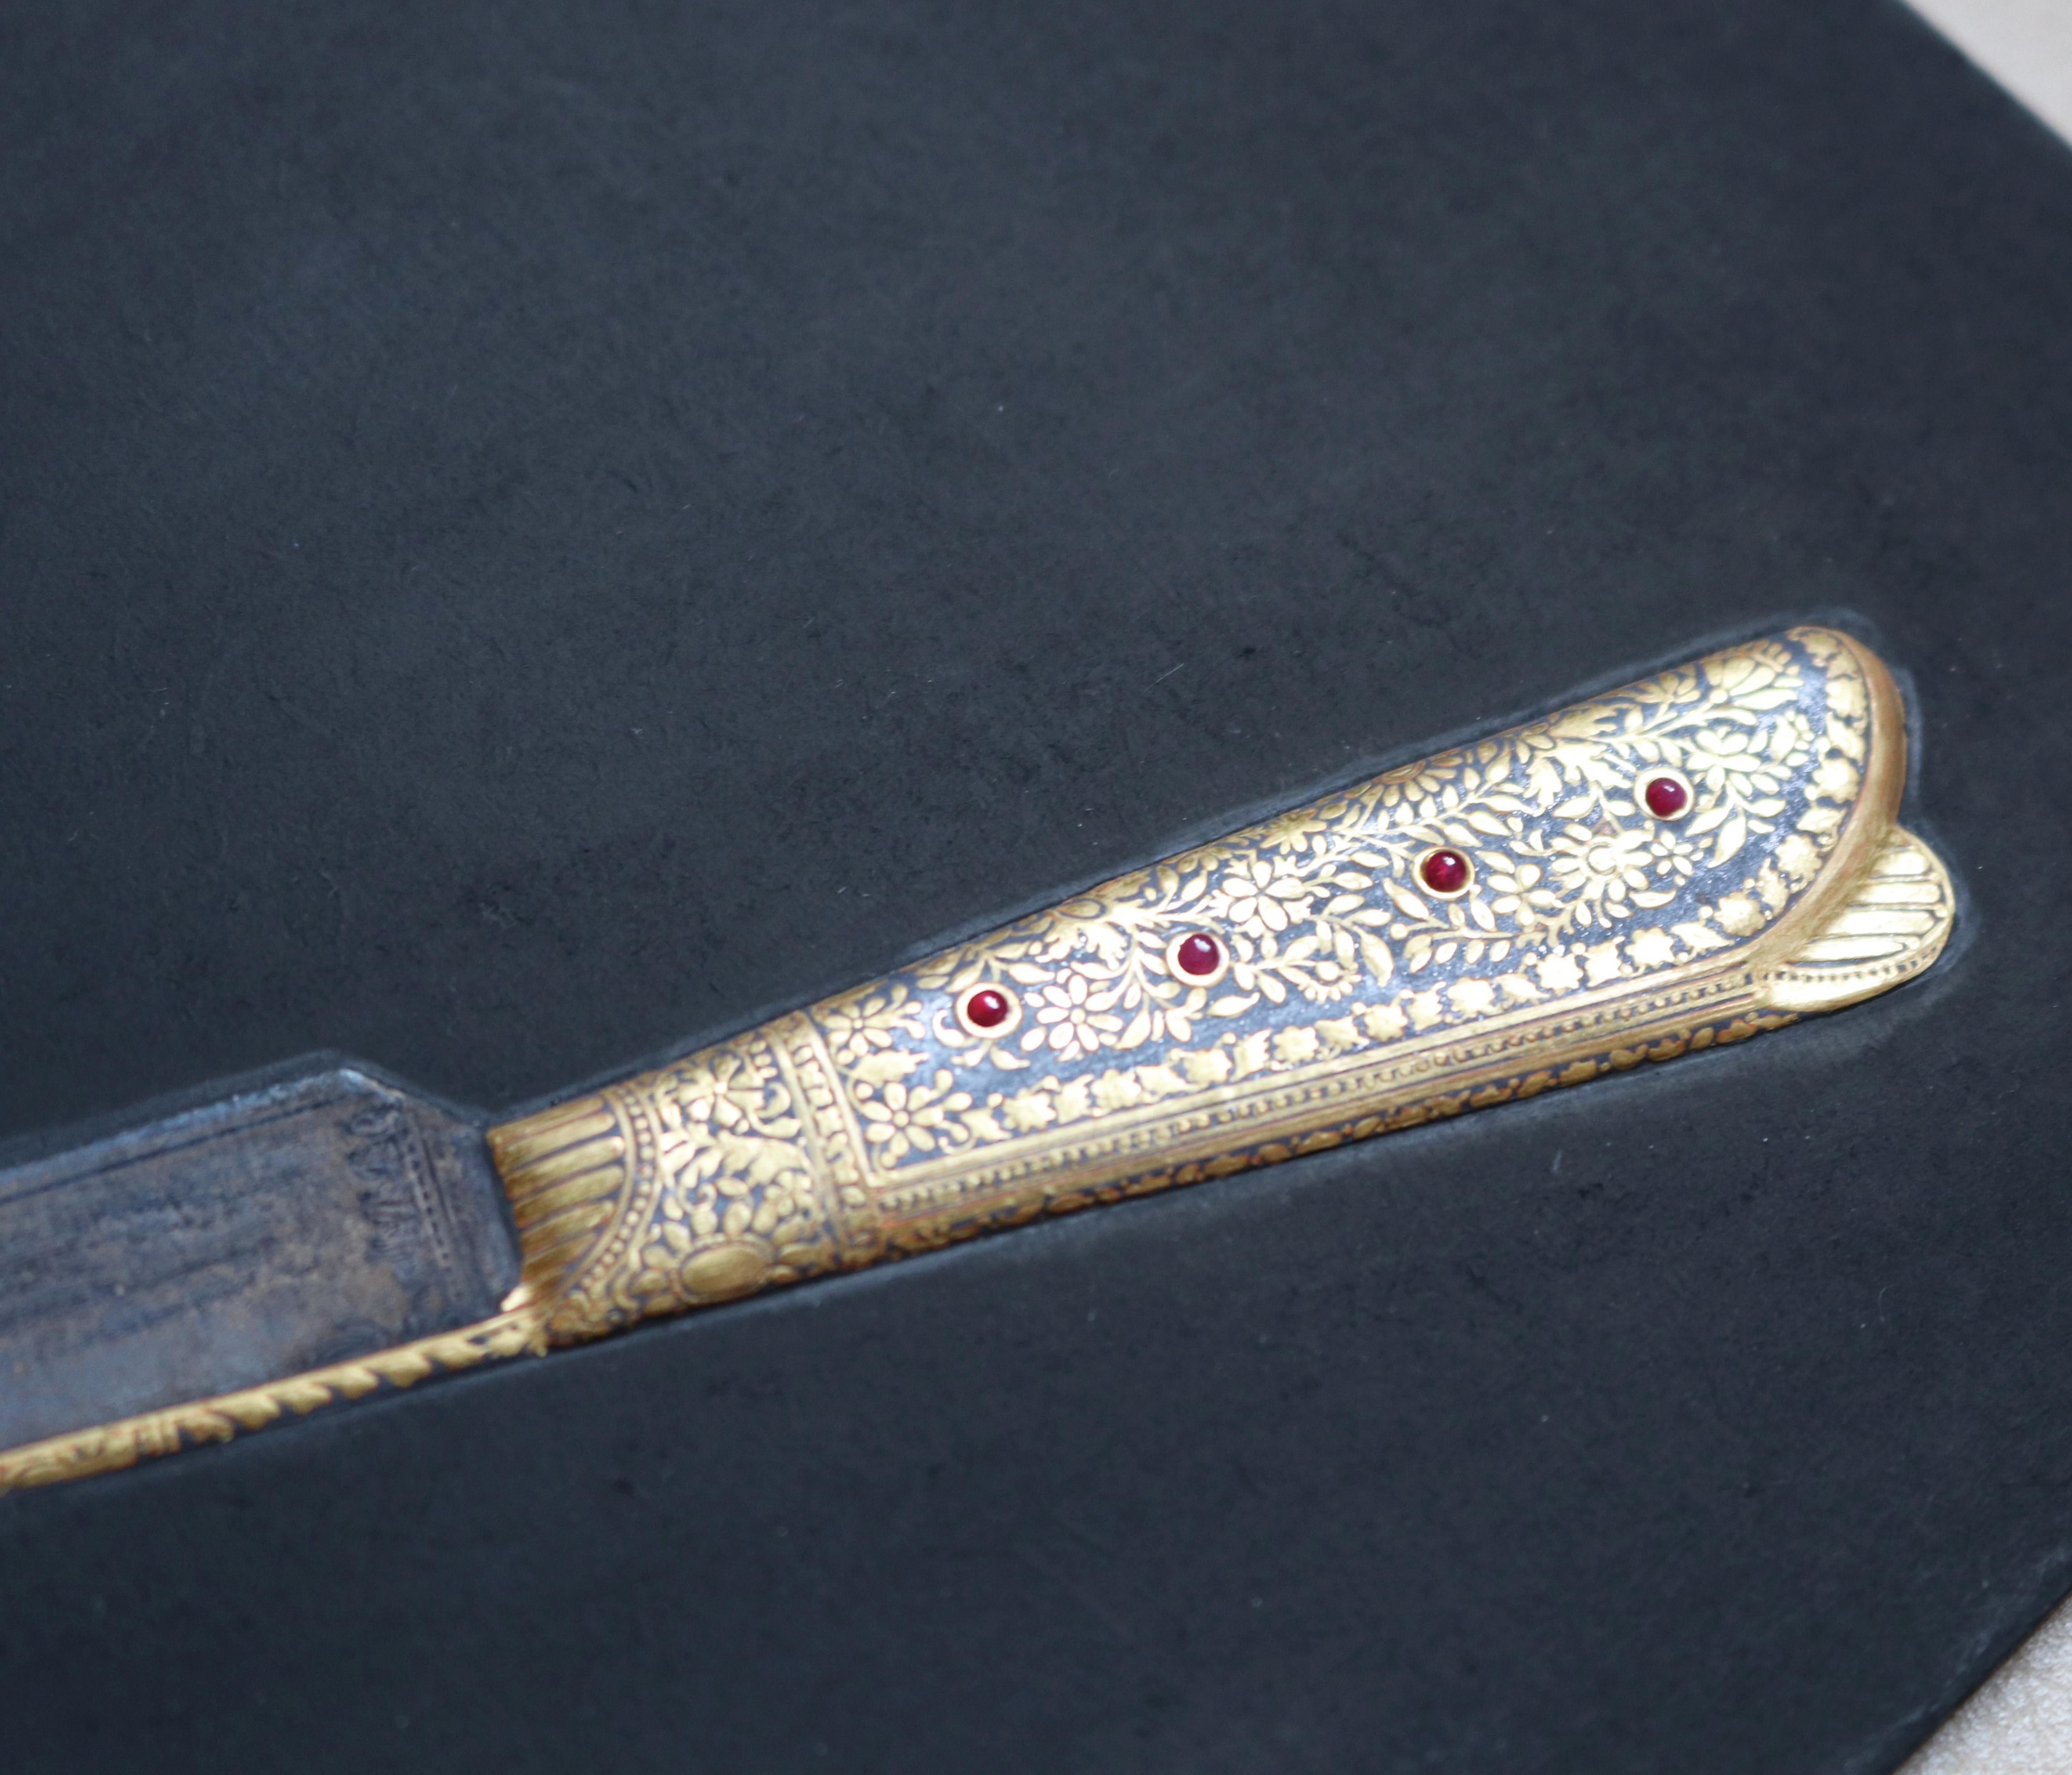 1985 hyperrealist relief painting of a hand drawn flower decorated dagger using vivid colors, including gold gilding. Signed Ramesh Sharma.
 